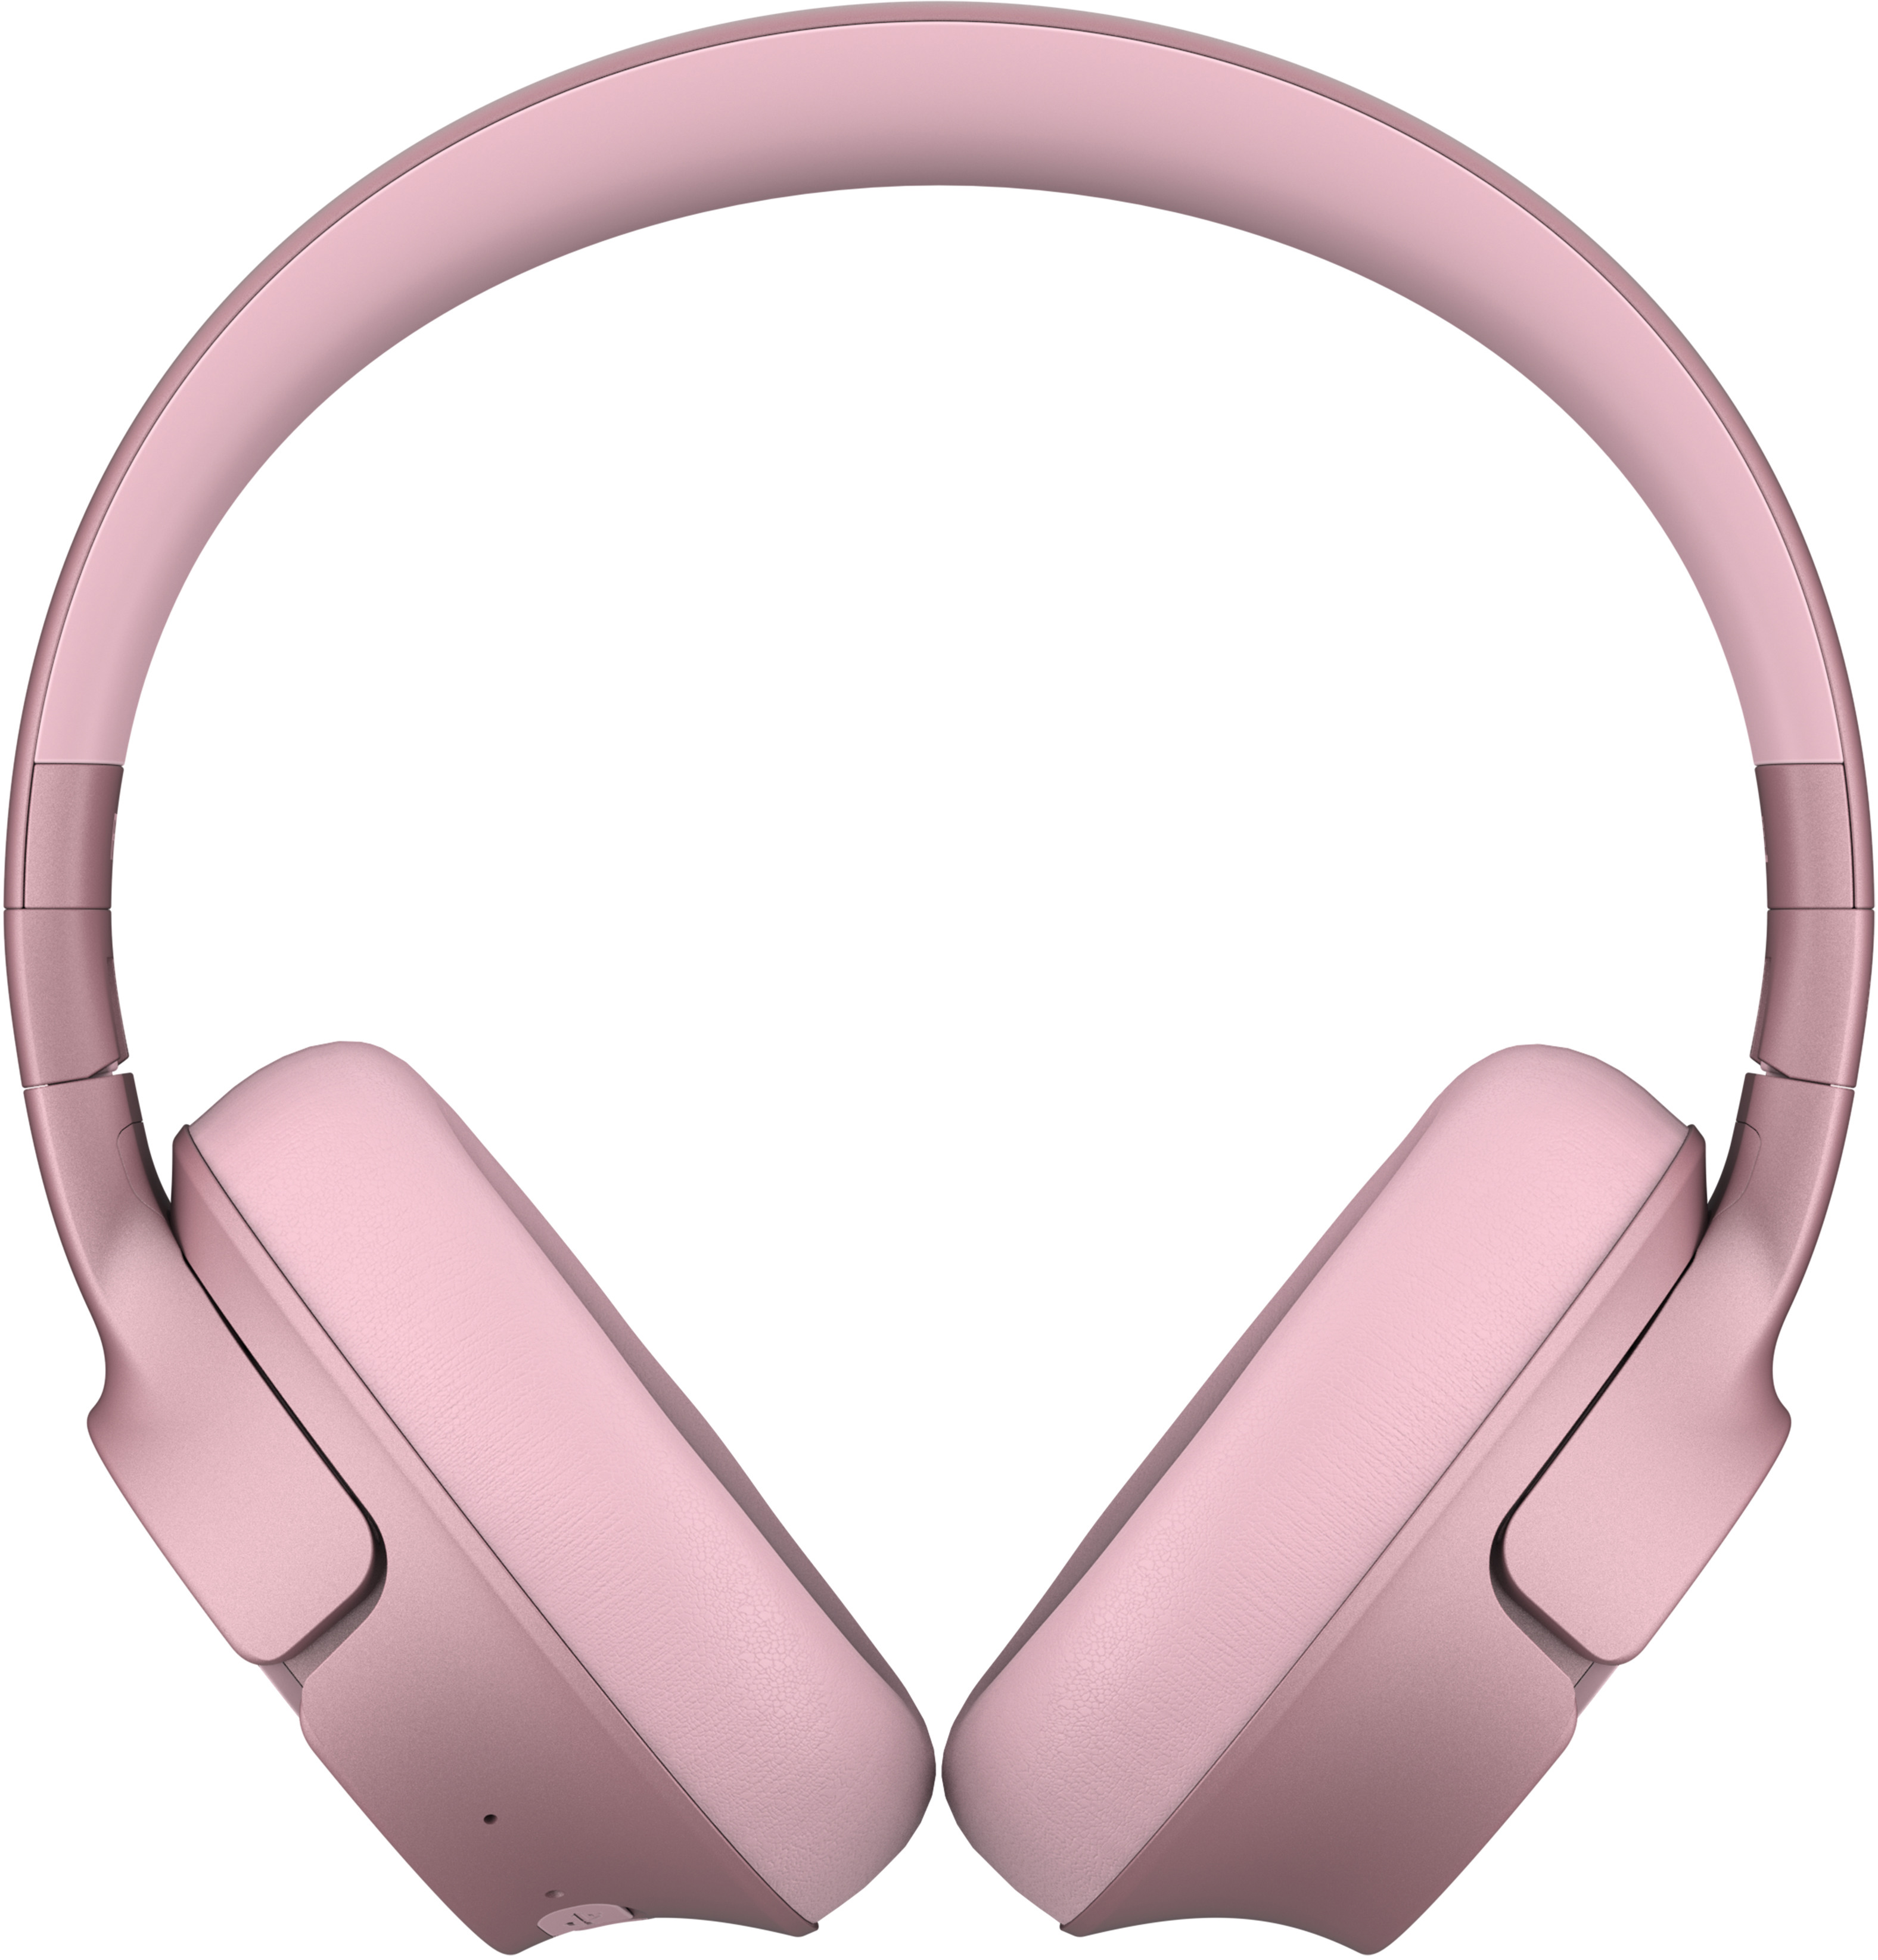 FRESH'N REBEL Clam Fuse - Wless over-ear 3HP3300PP Pastel Pink with Hybrid ANC